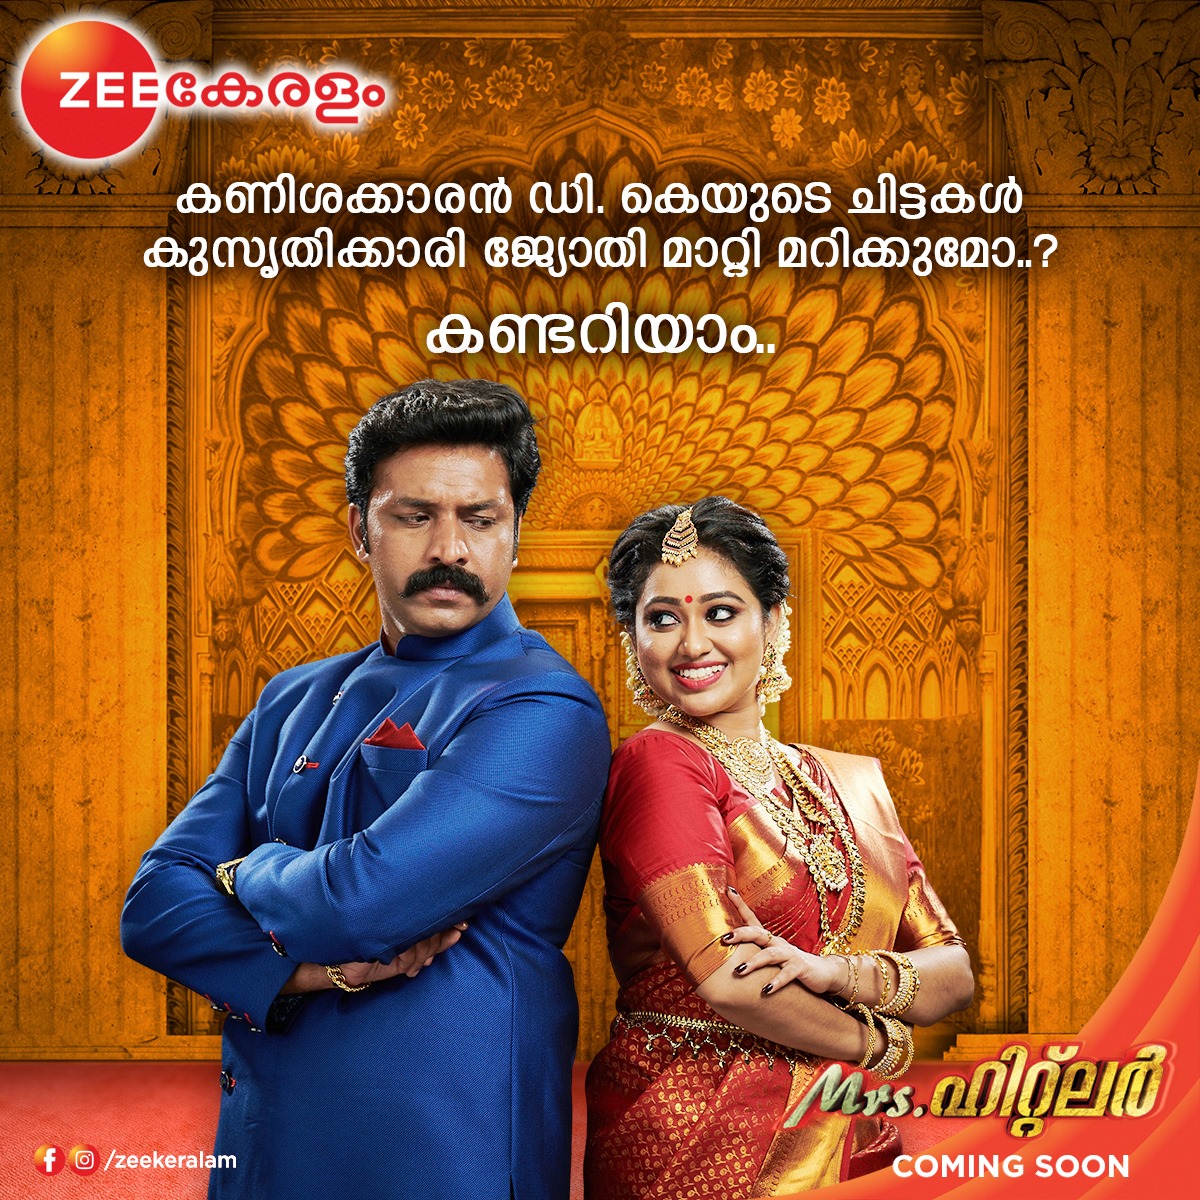 Zee Keralam is all set to premiere Mrs. Hitler starring Shanavas and Meghana Vincent on April 19th, 8.30 PM.